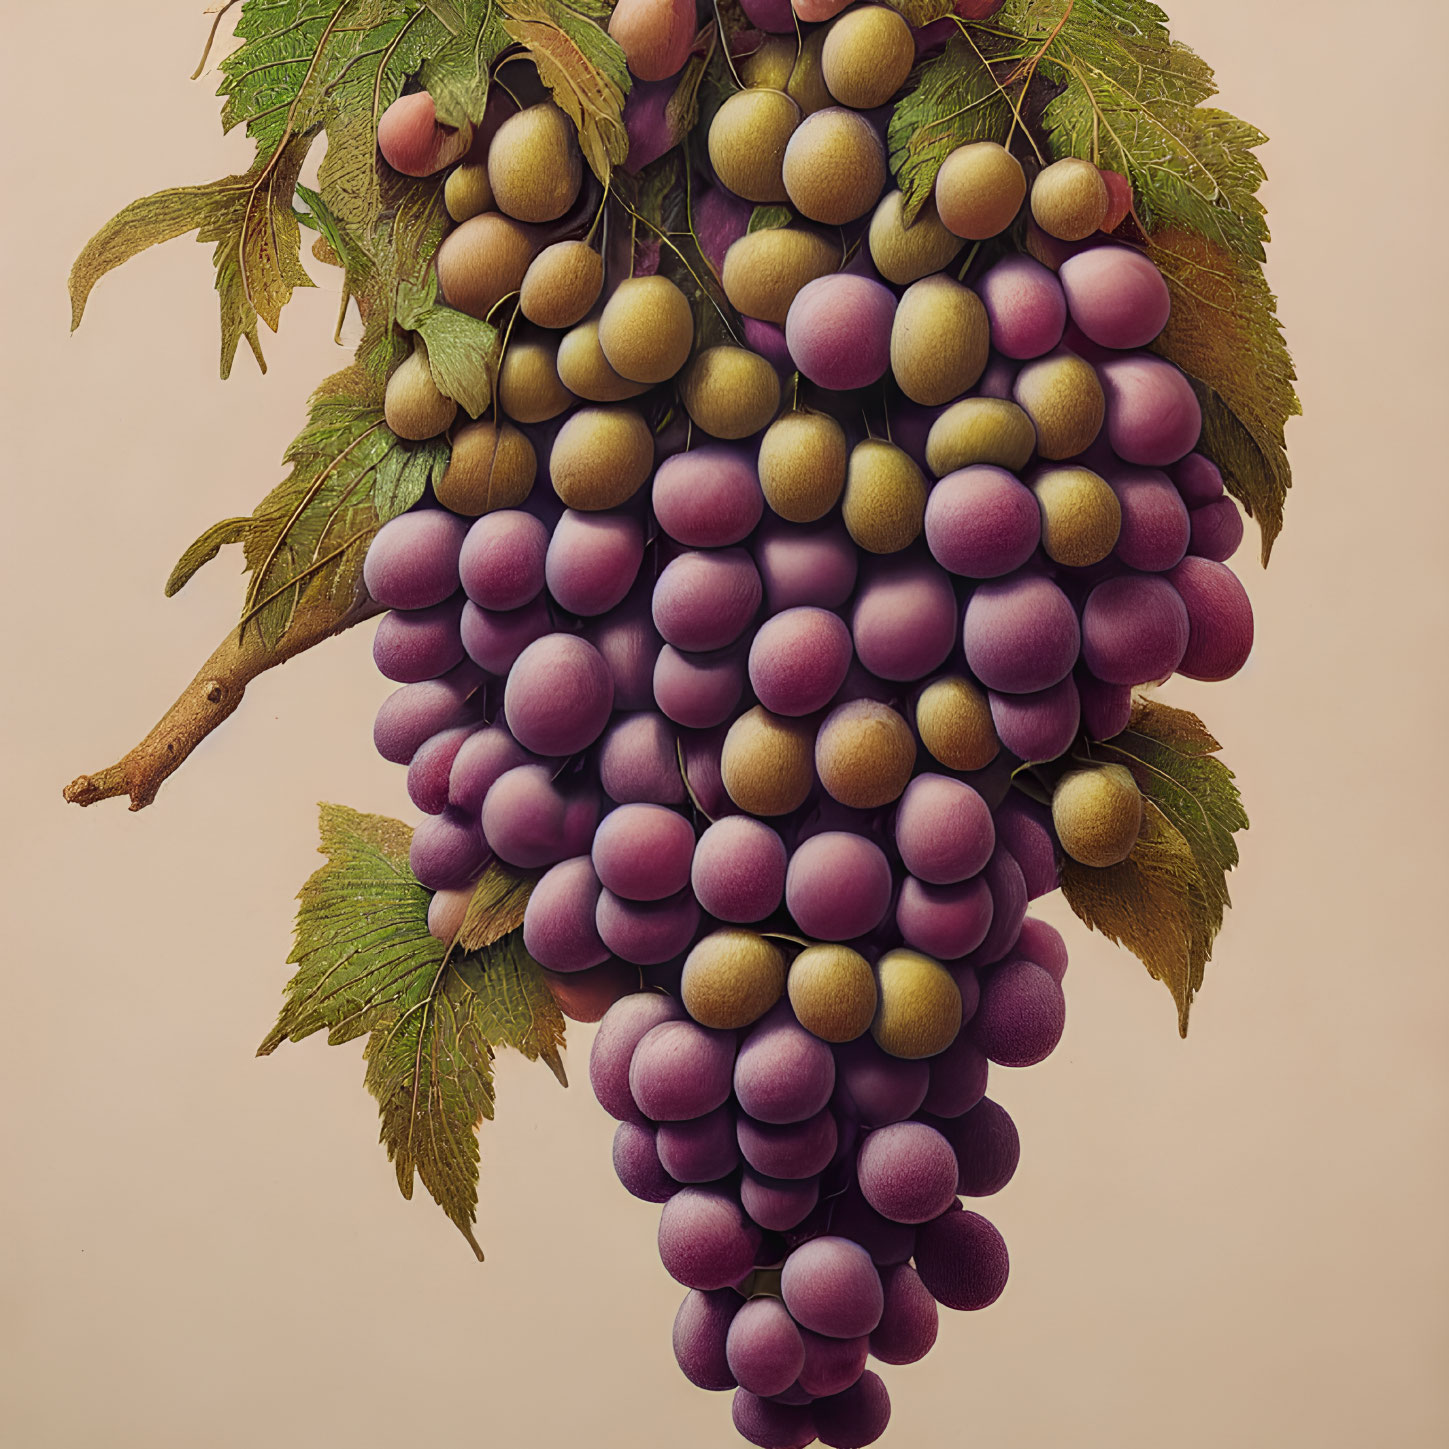 Ripe Purple Grapes with Green Leaves on Beige Background